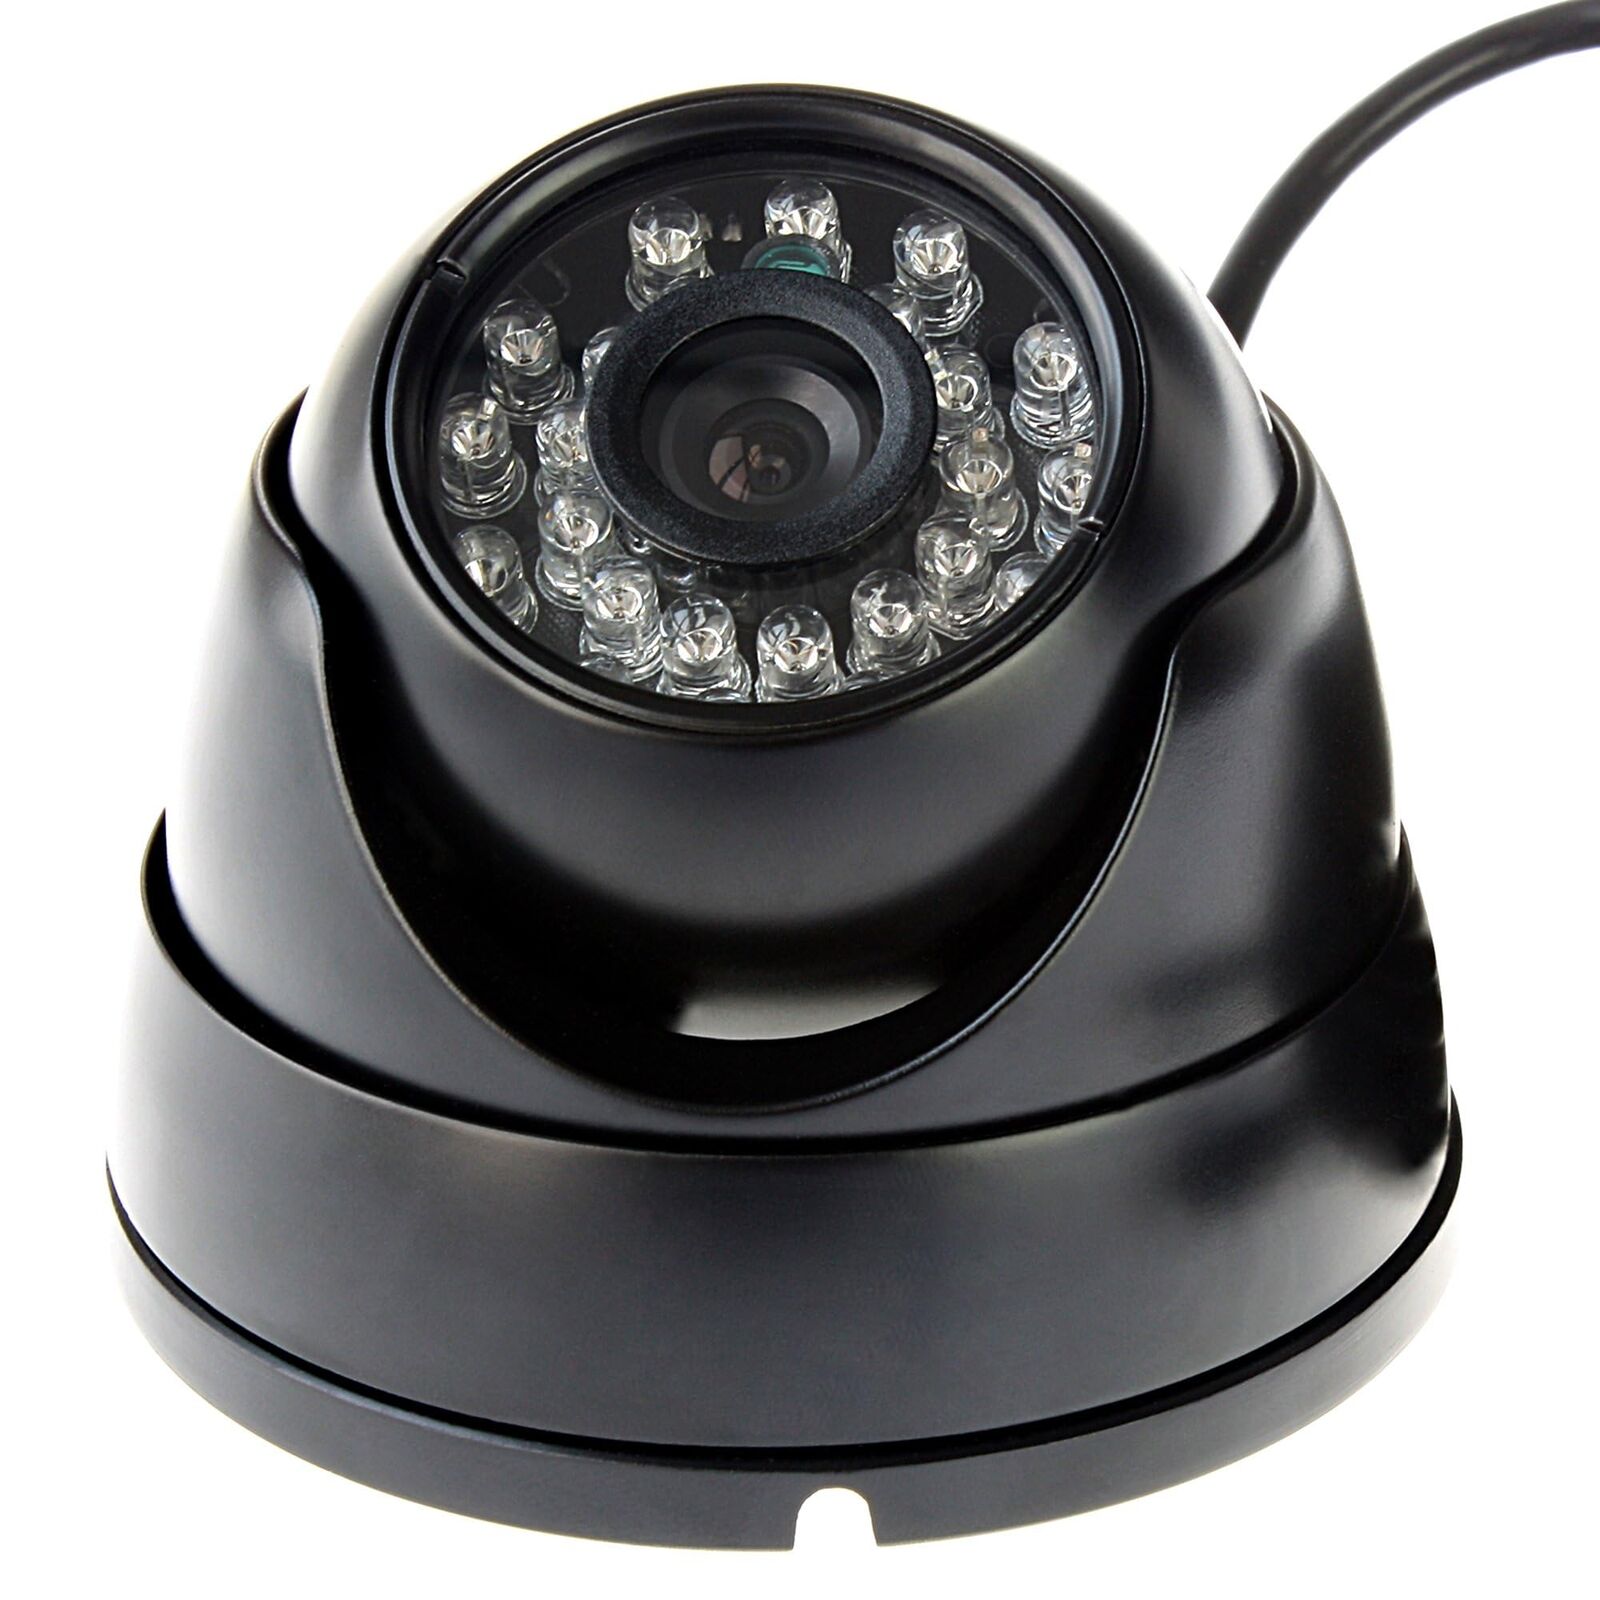 1080p Day Night Vision USB Camera IR Infrared Webcam with Dome Housing Home S...